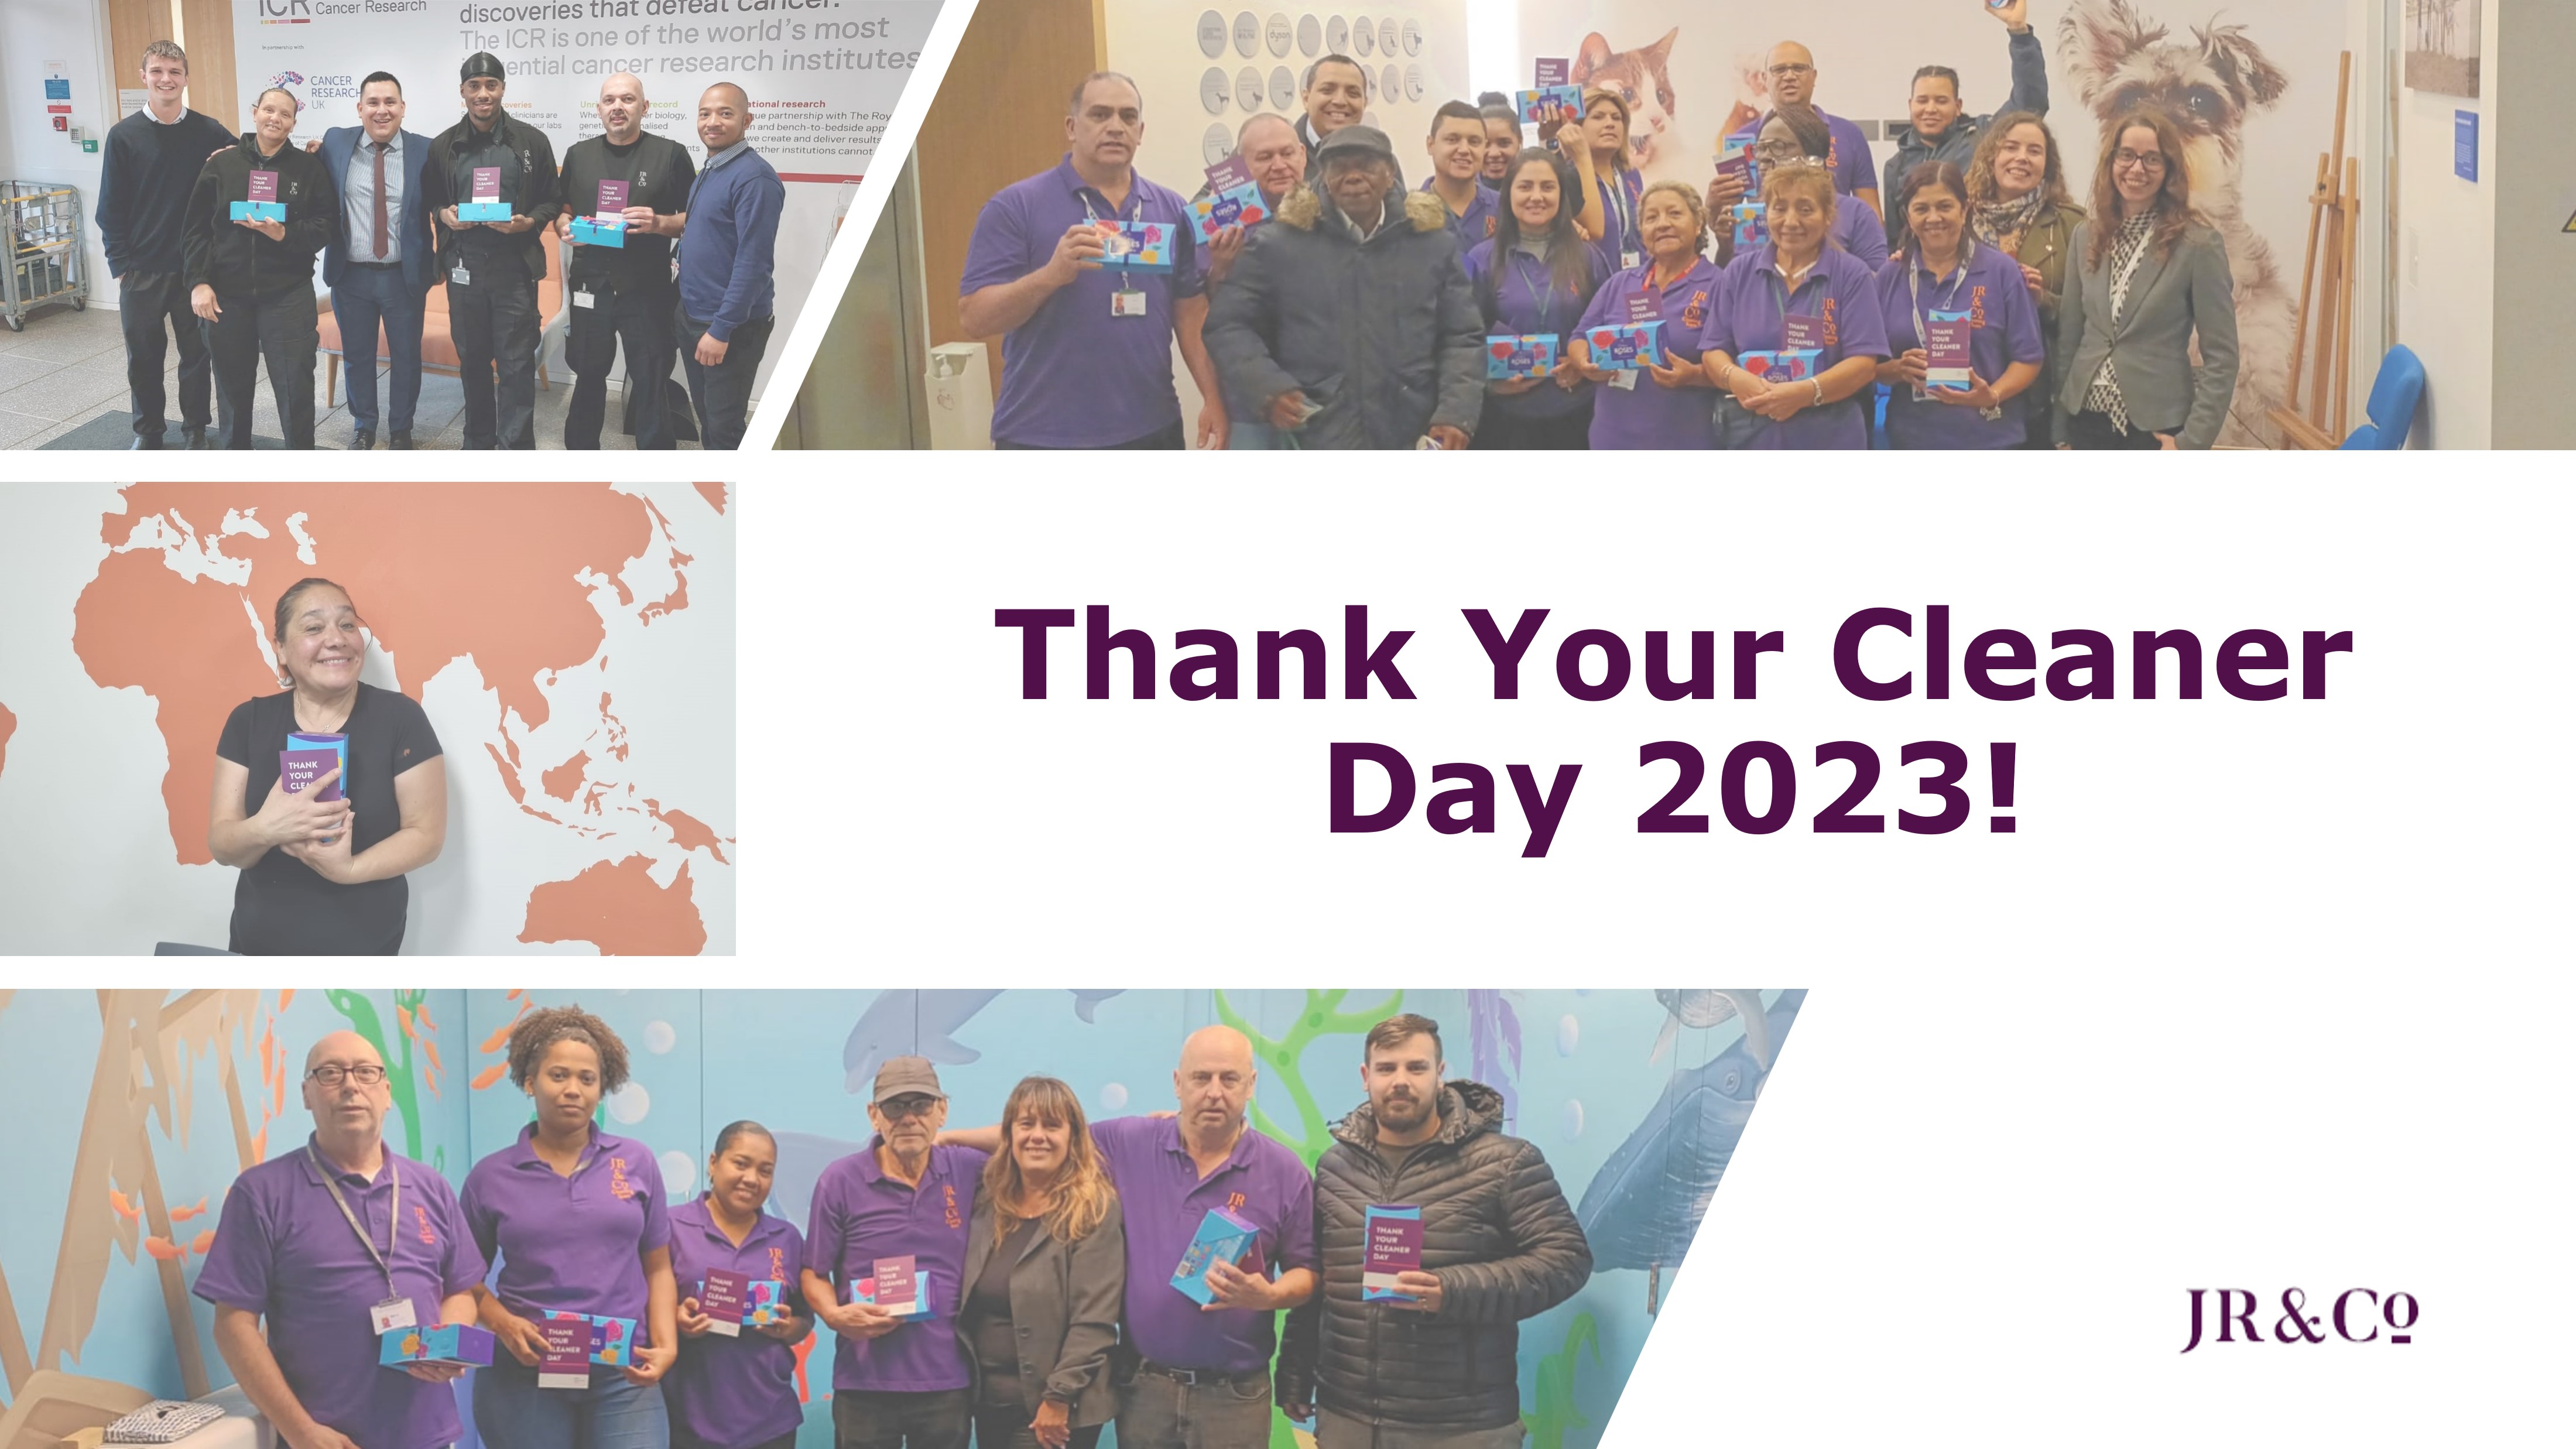 THANK YOUR CLEANER DAY 2023: CELEBRATING OUR UNSUNG HEROES